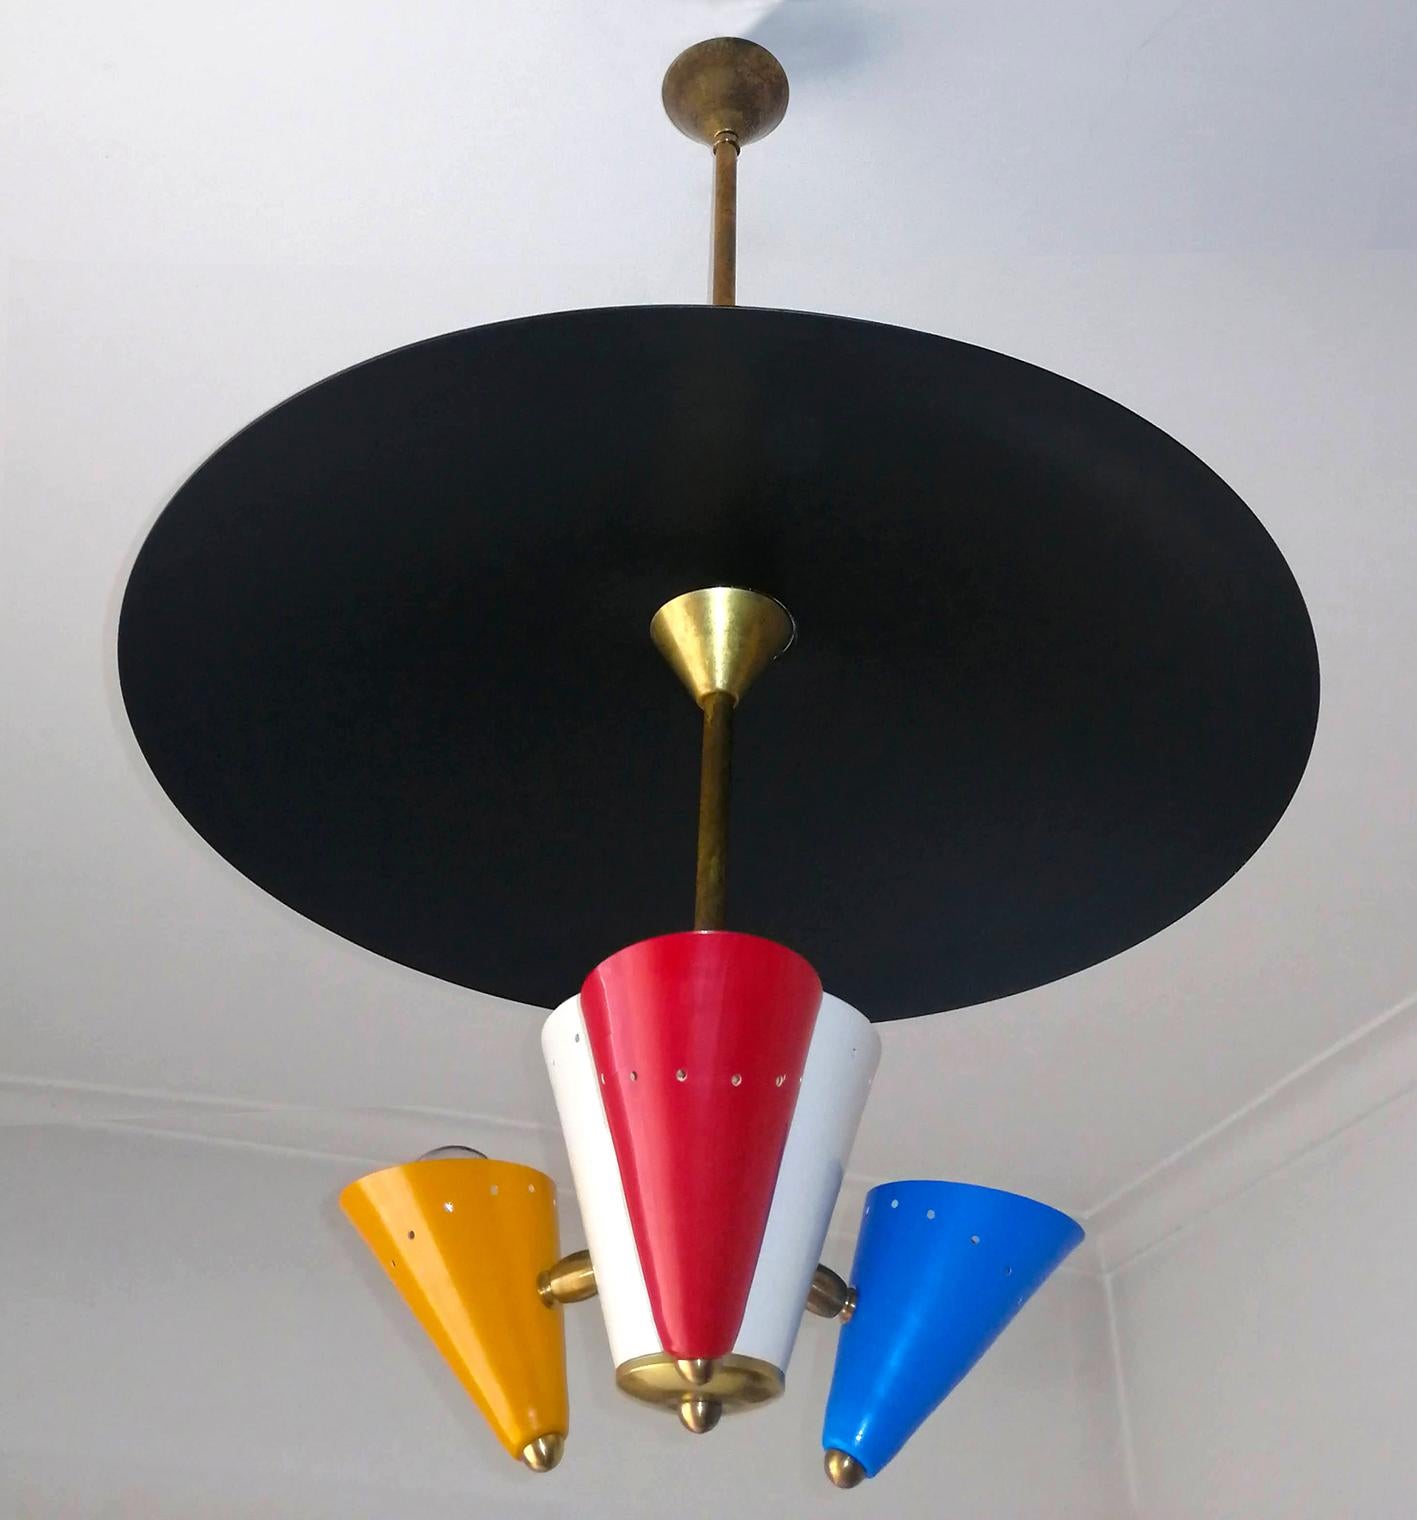 Shades adjust to various positions. 
Dimensions
Height 29.53 in. (75 cm)
Diameter 21.66 in. (55 cm)
3 light bulbs/ Good working condition
Assembly required. Bulbs not included.

    